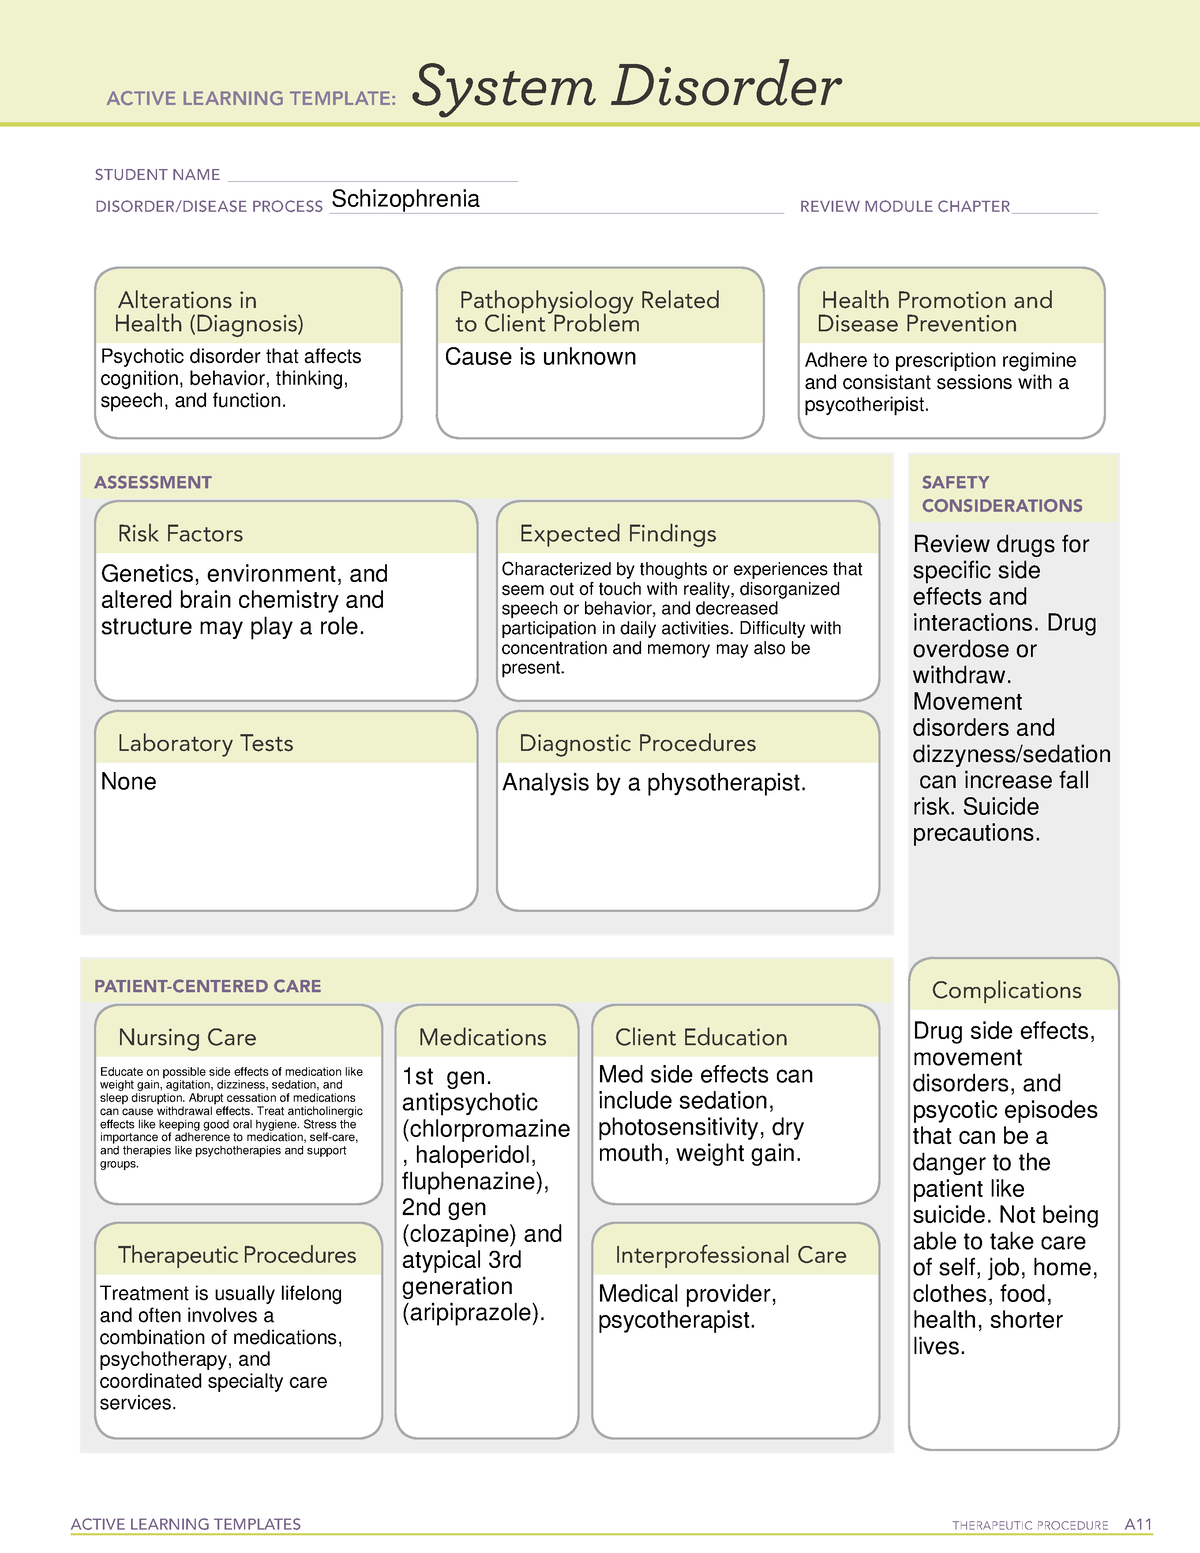 schizophrenia-system-disorder-template-ati-active-learning-template